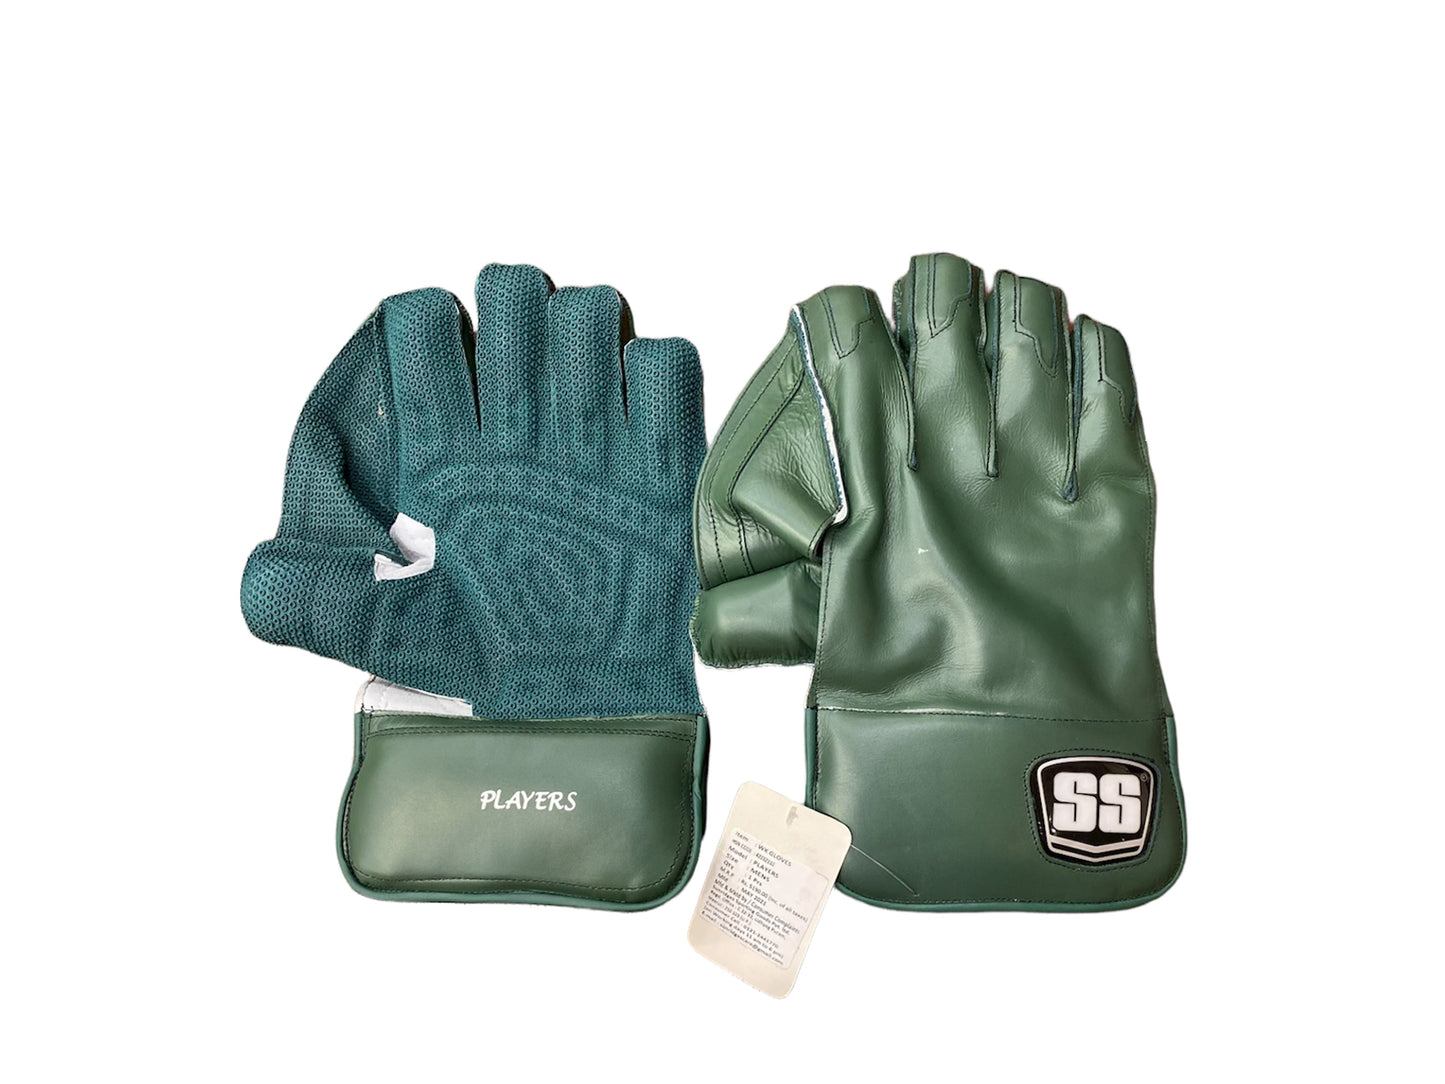 SS Players Wicket Keeping Gloves - Green (MS Dhoni)